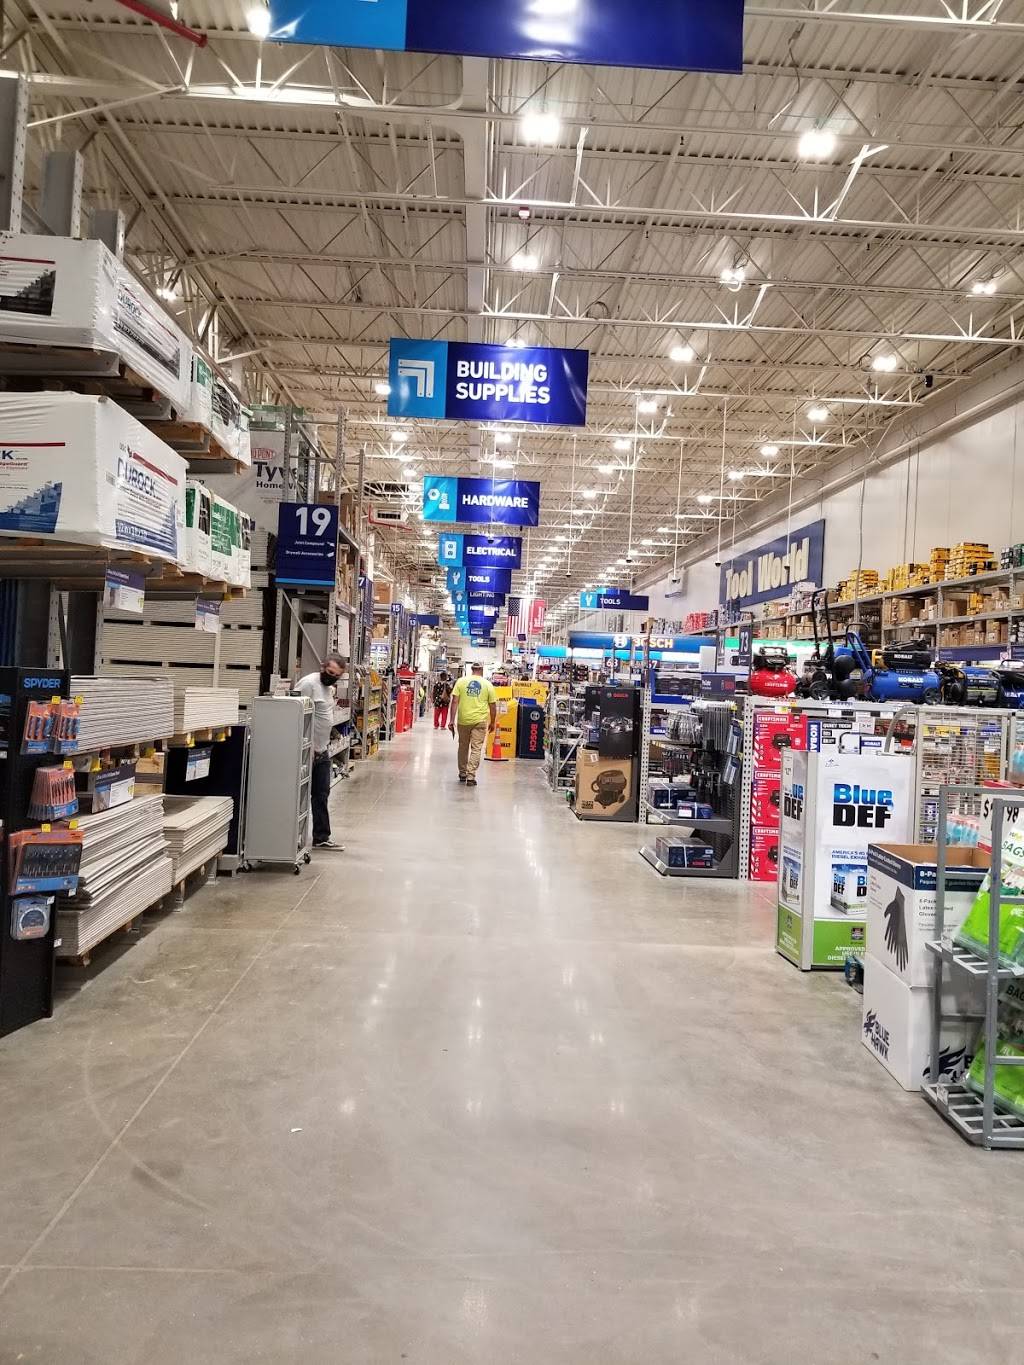 Lowes Home Improvement | 932 Loughborough Ave, St. Louis, MO 63111 | Phone: (314) 450-2140